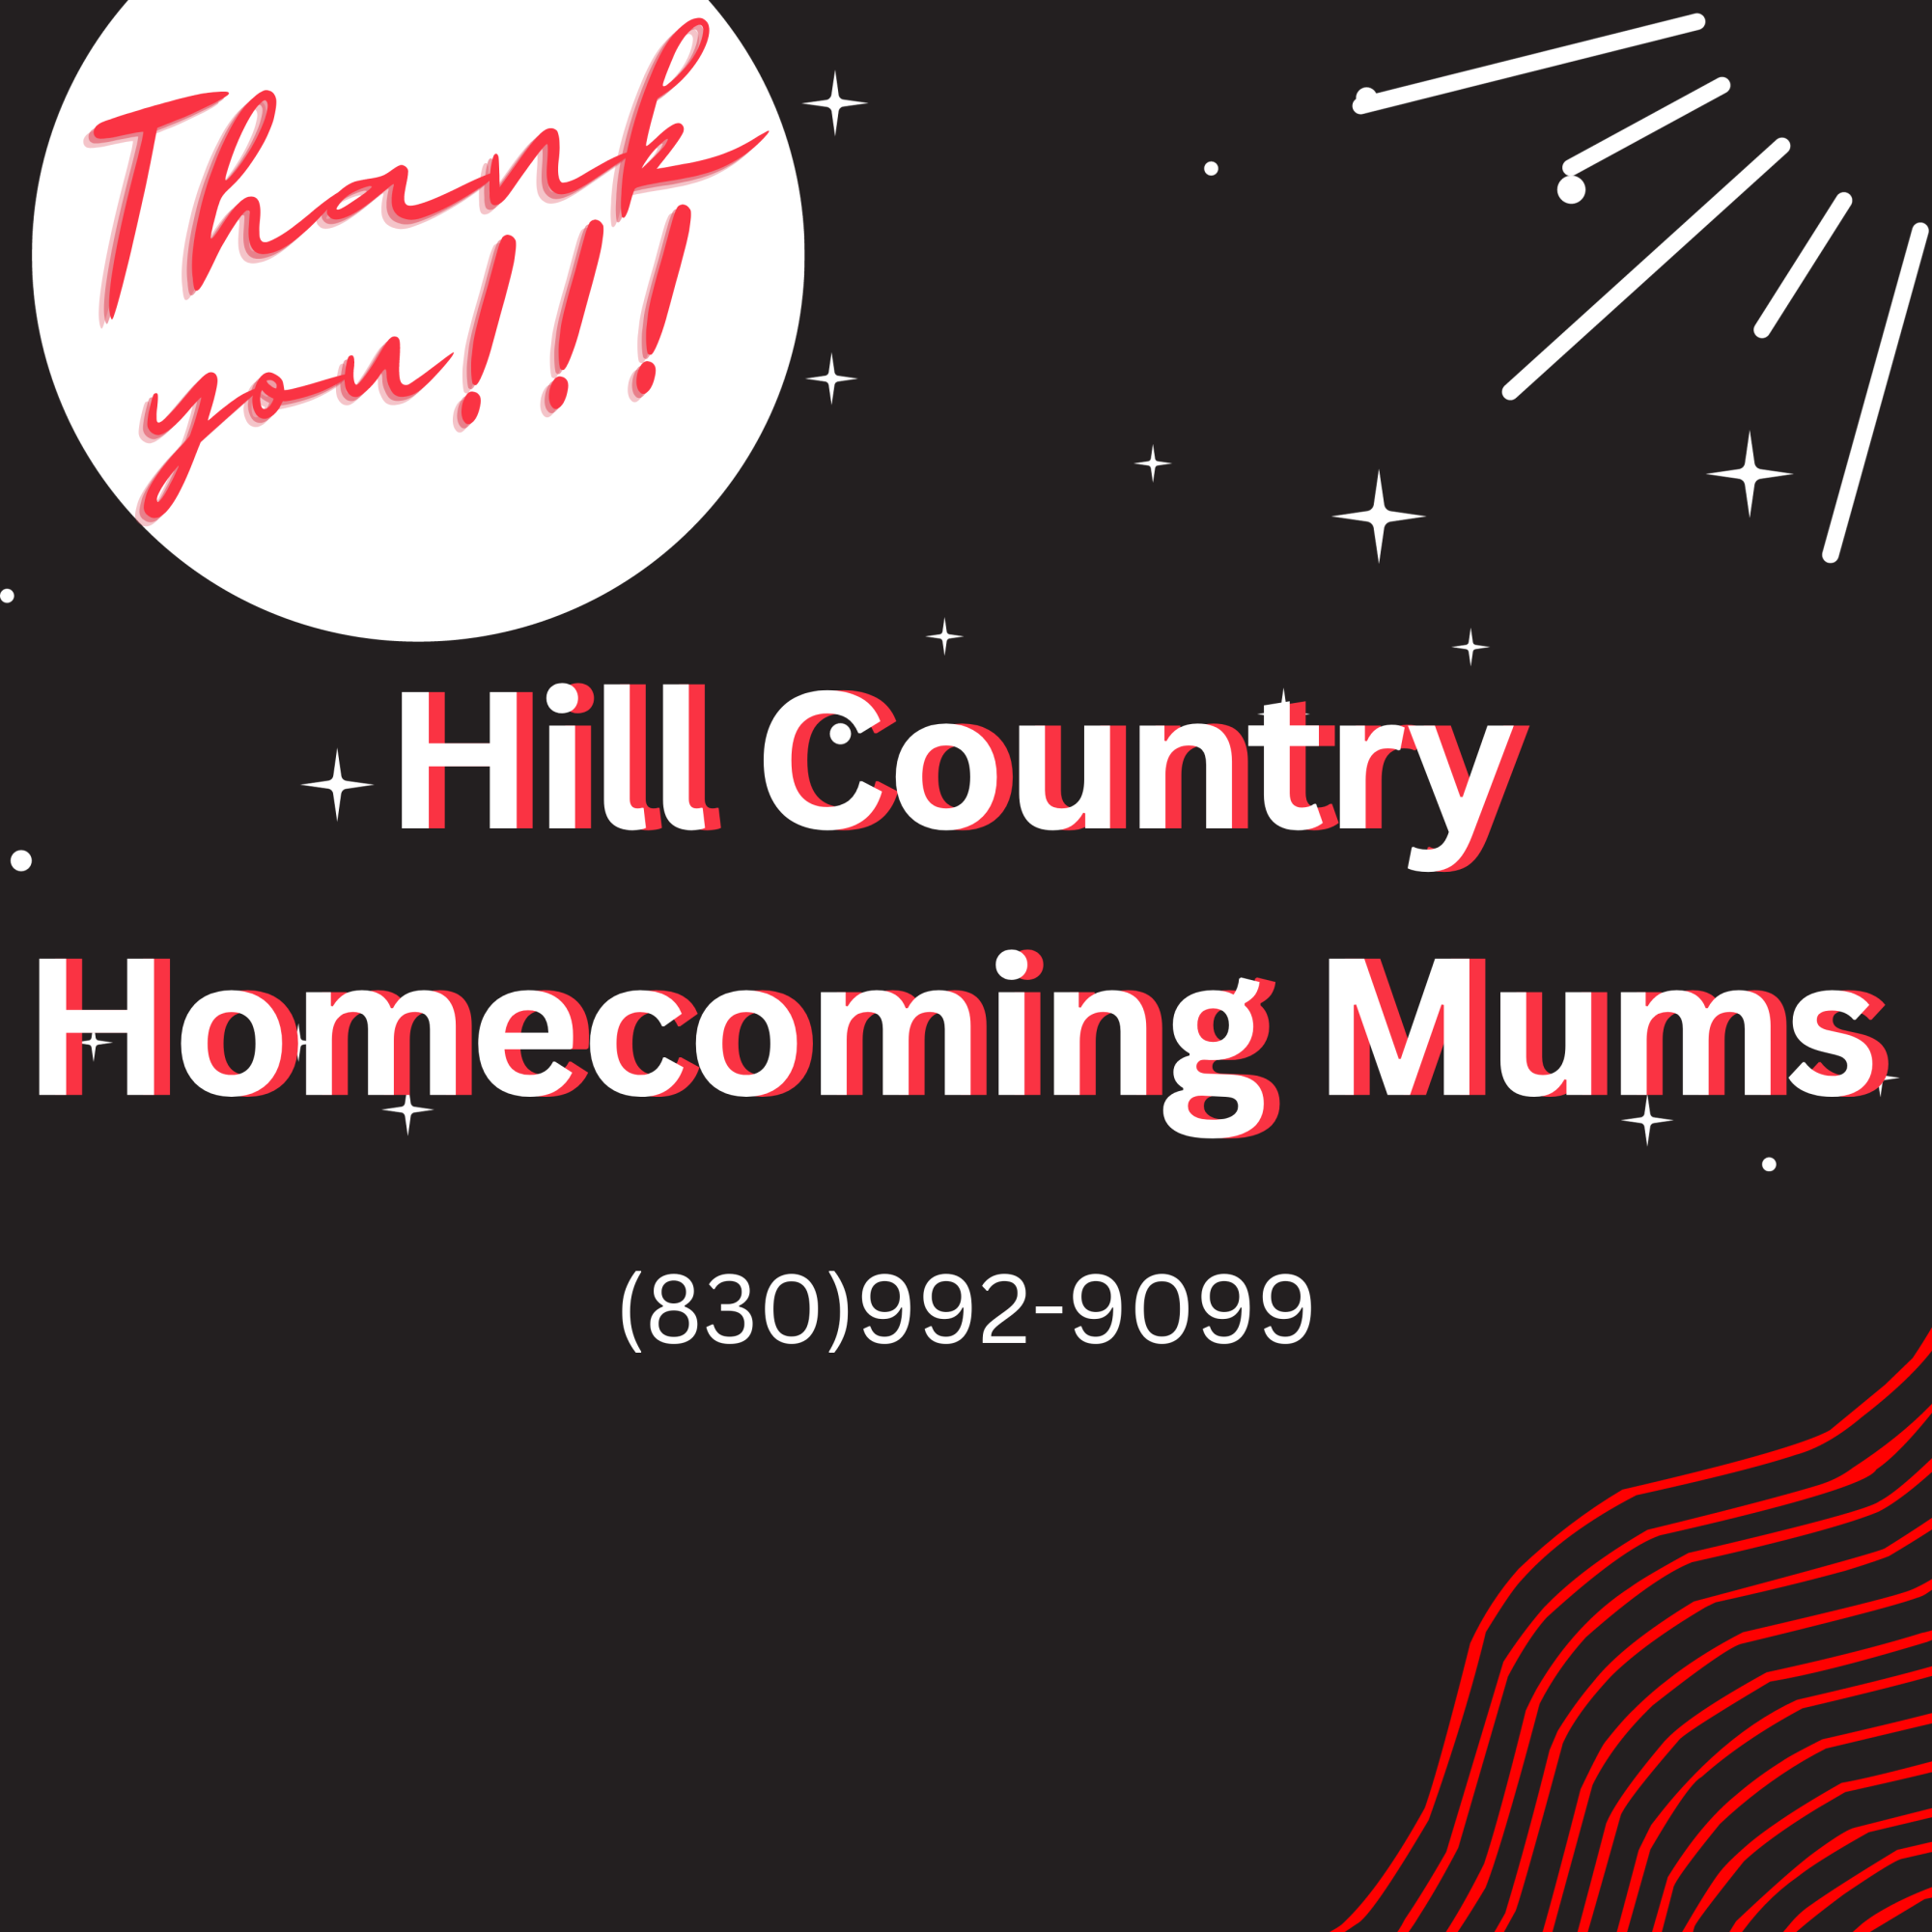 Hill Country Homecoming Mums